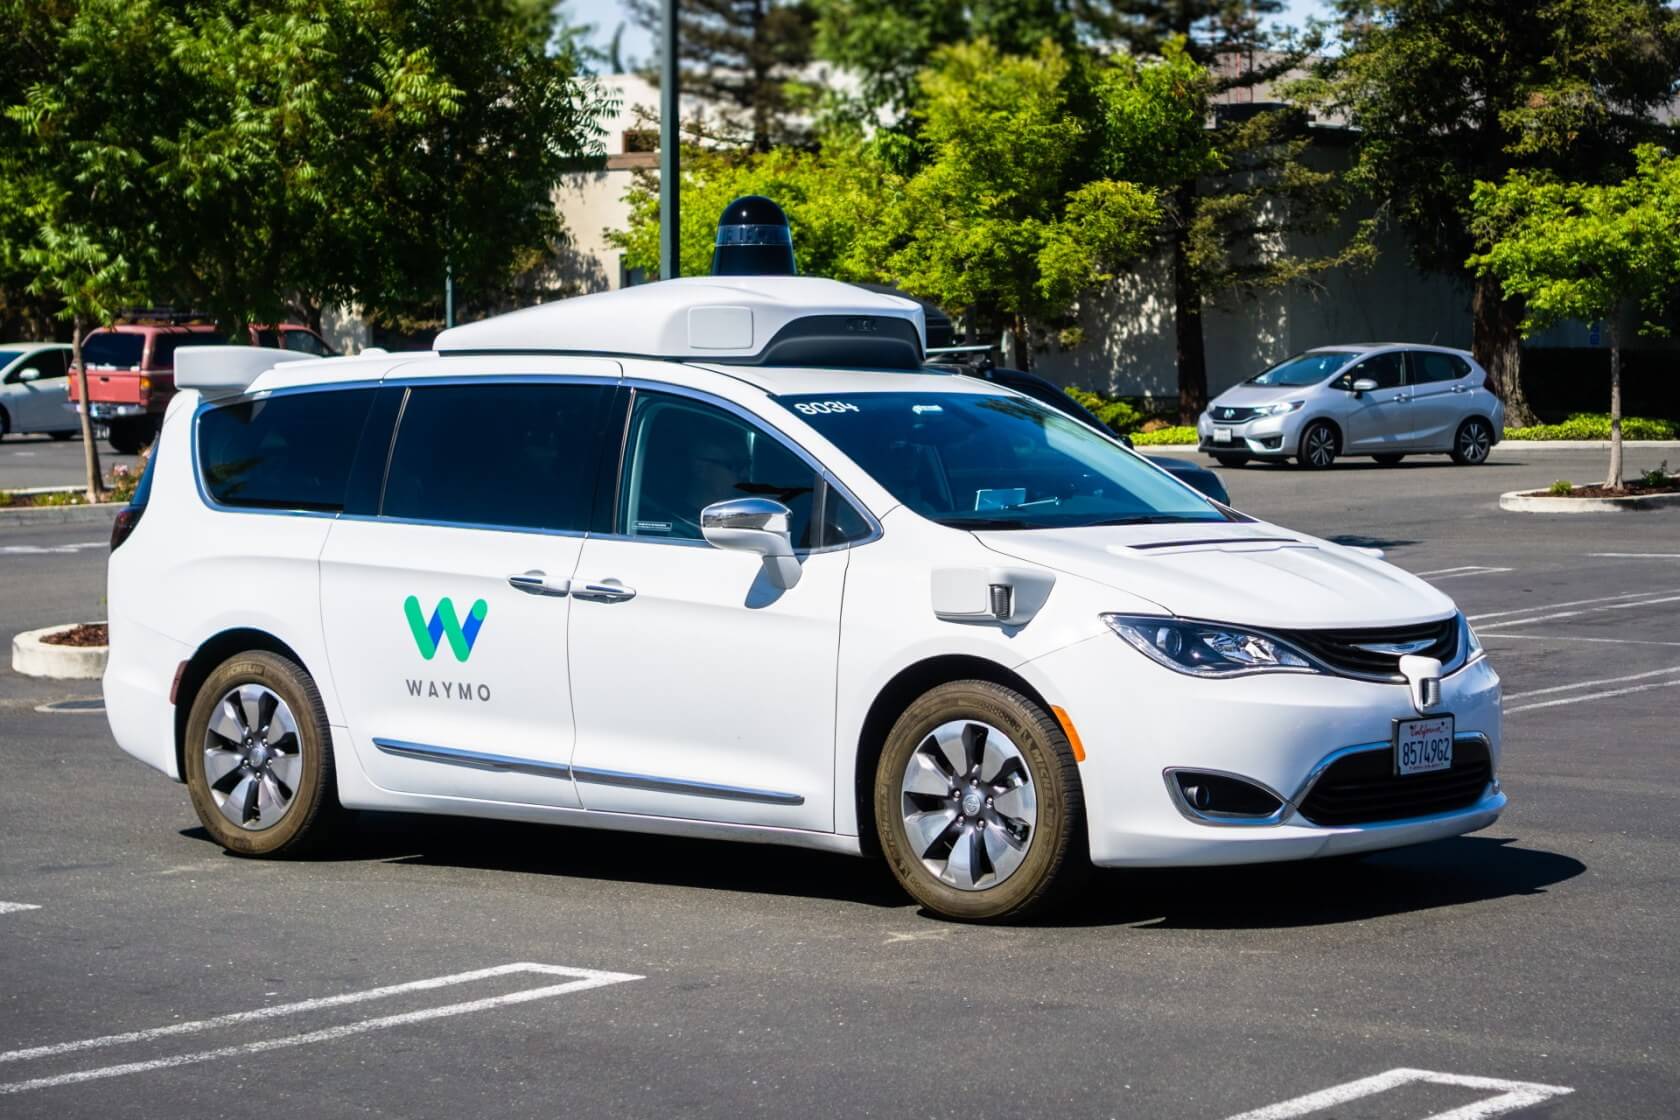 Phoenix-based iPhone users can now request a robo-taxi ride with Waymo's new iOS app